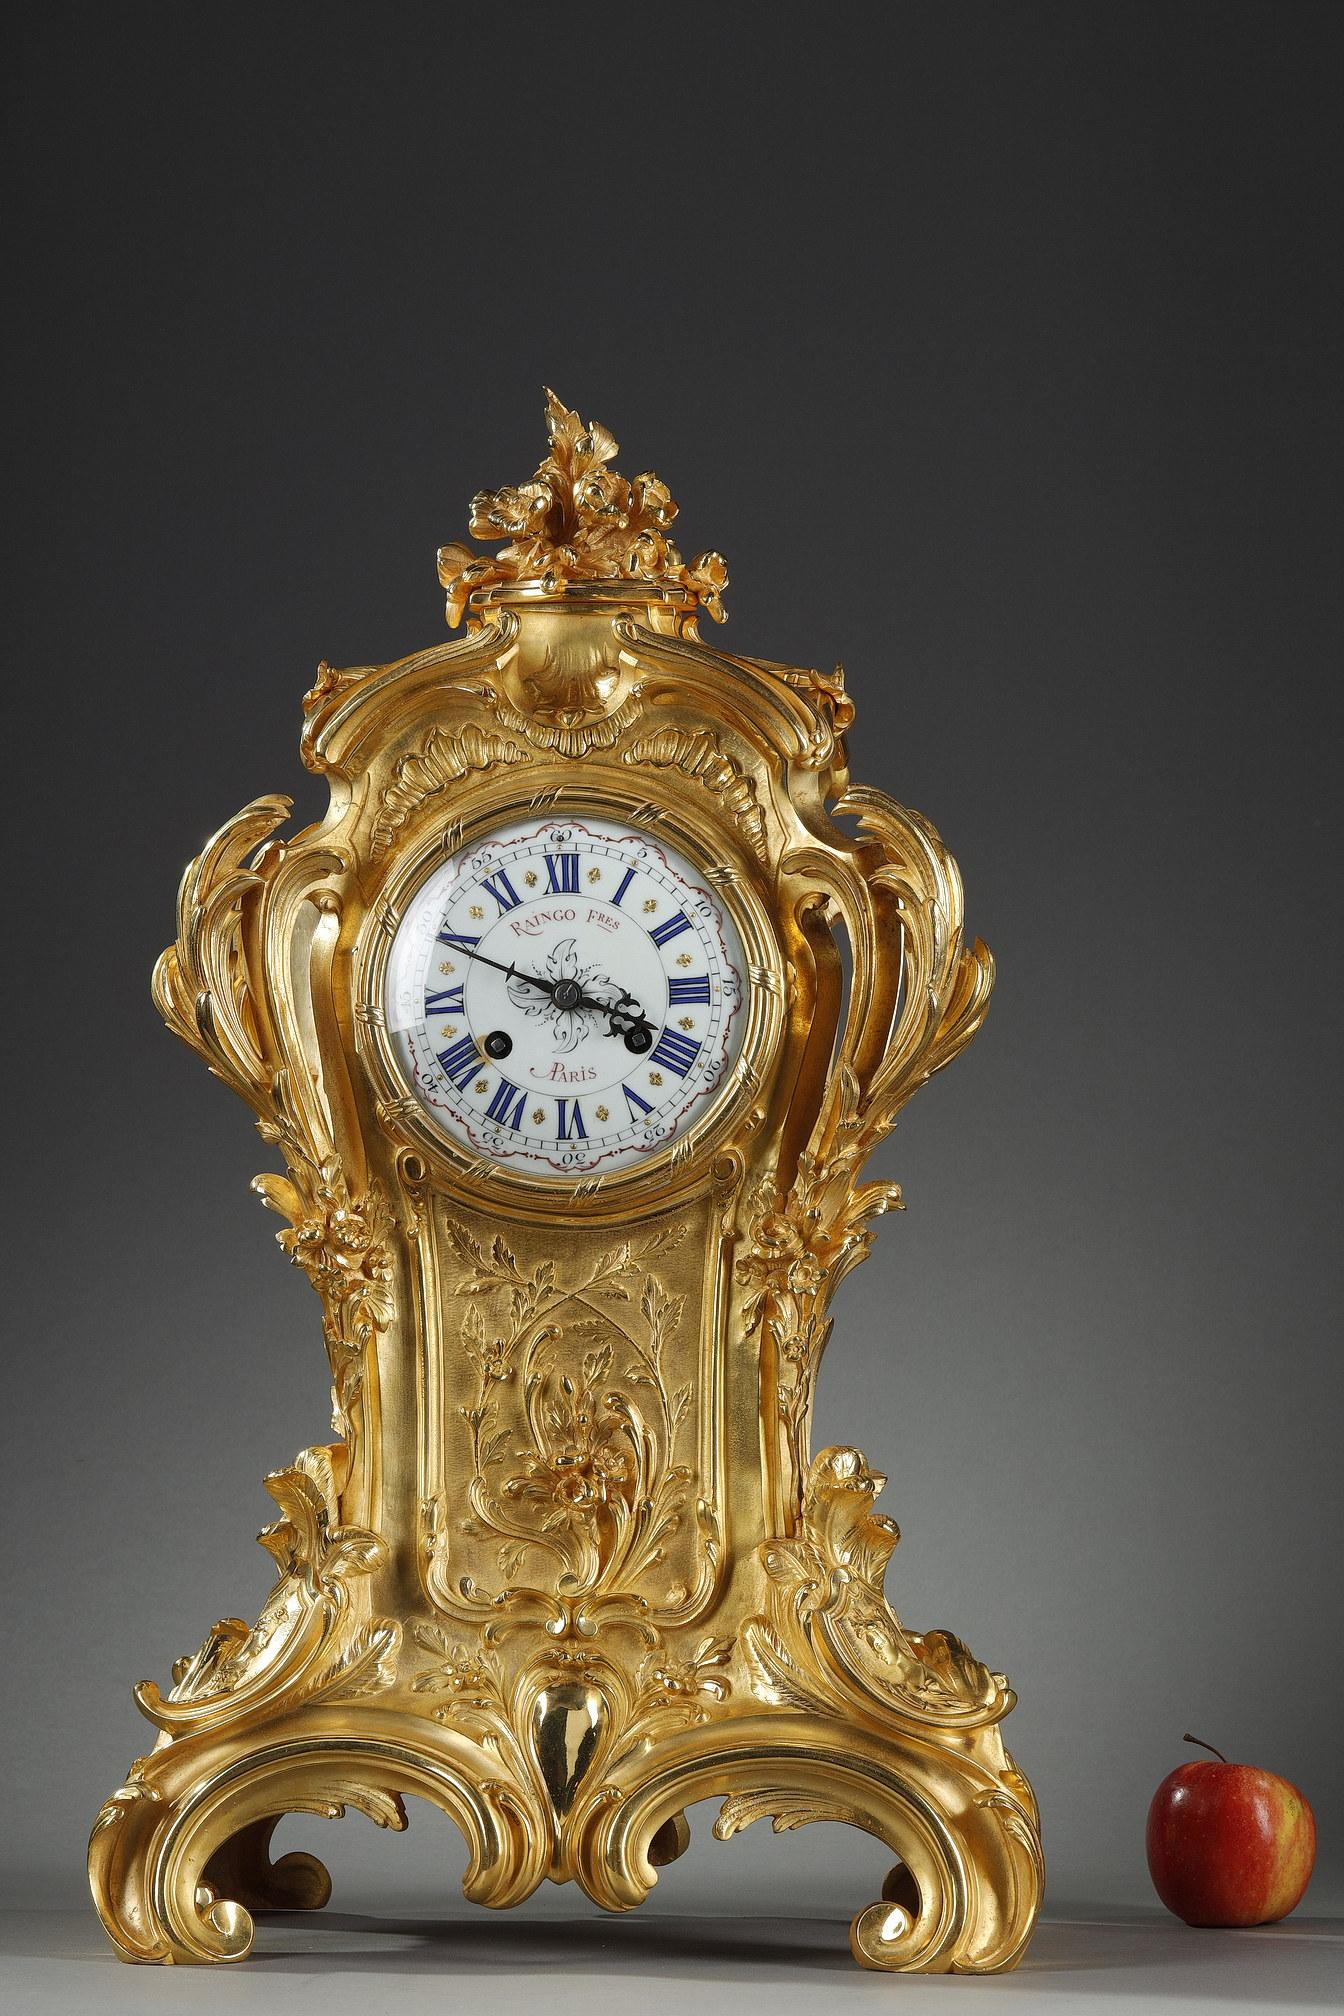 Important Rococo style clock in chased and gilt bronze. This Louis XV style clock has a very fine decoration of moving foliage, flowers and shells. The whole is surmounted by a bouquet of flowers. The four cambered feet are decorated with portraits